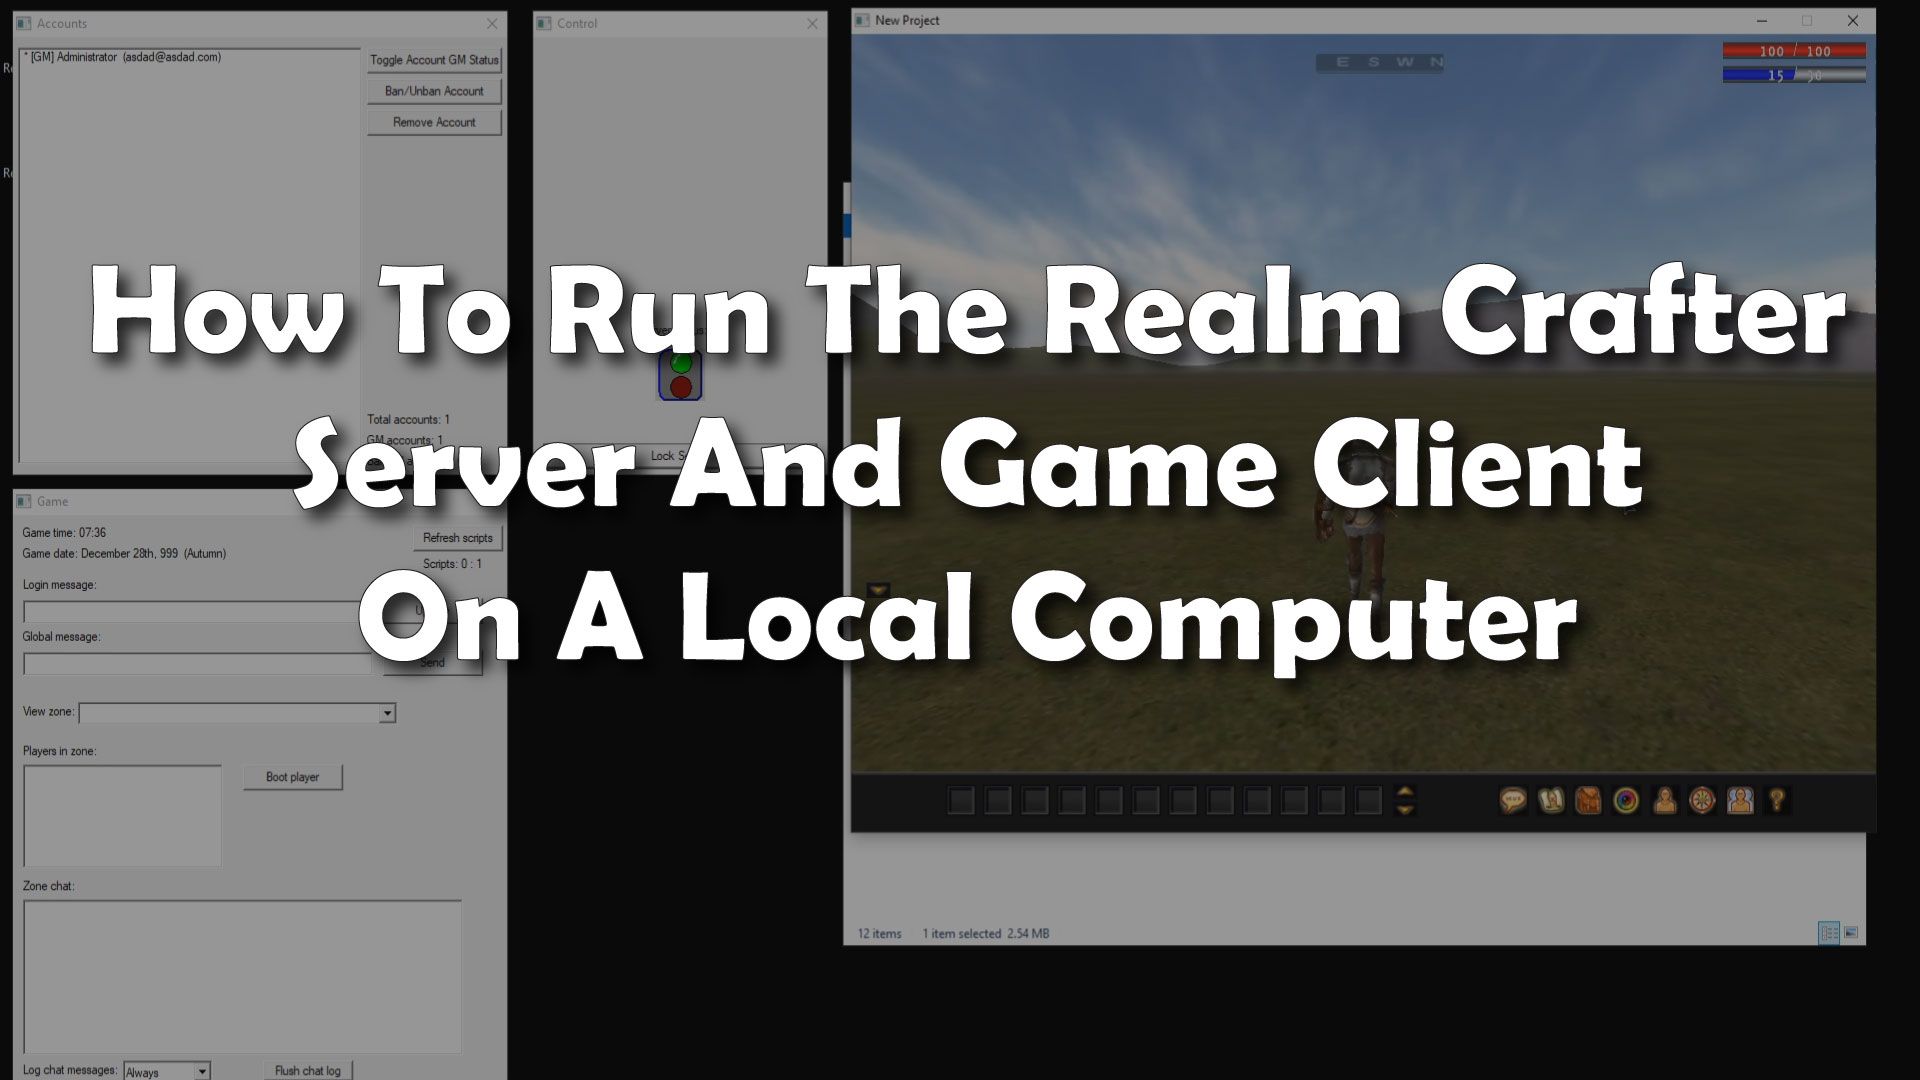 How To Run The Realm Crafter Server And Game Client On A Local Computer title image